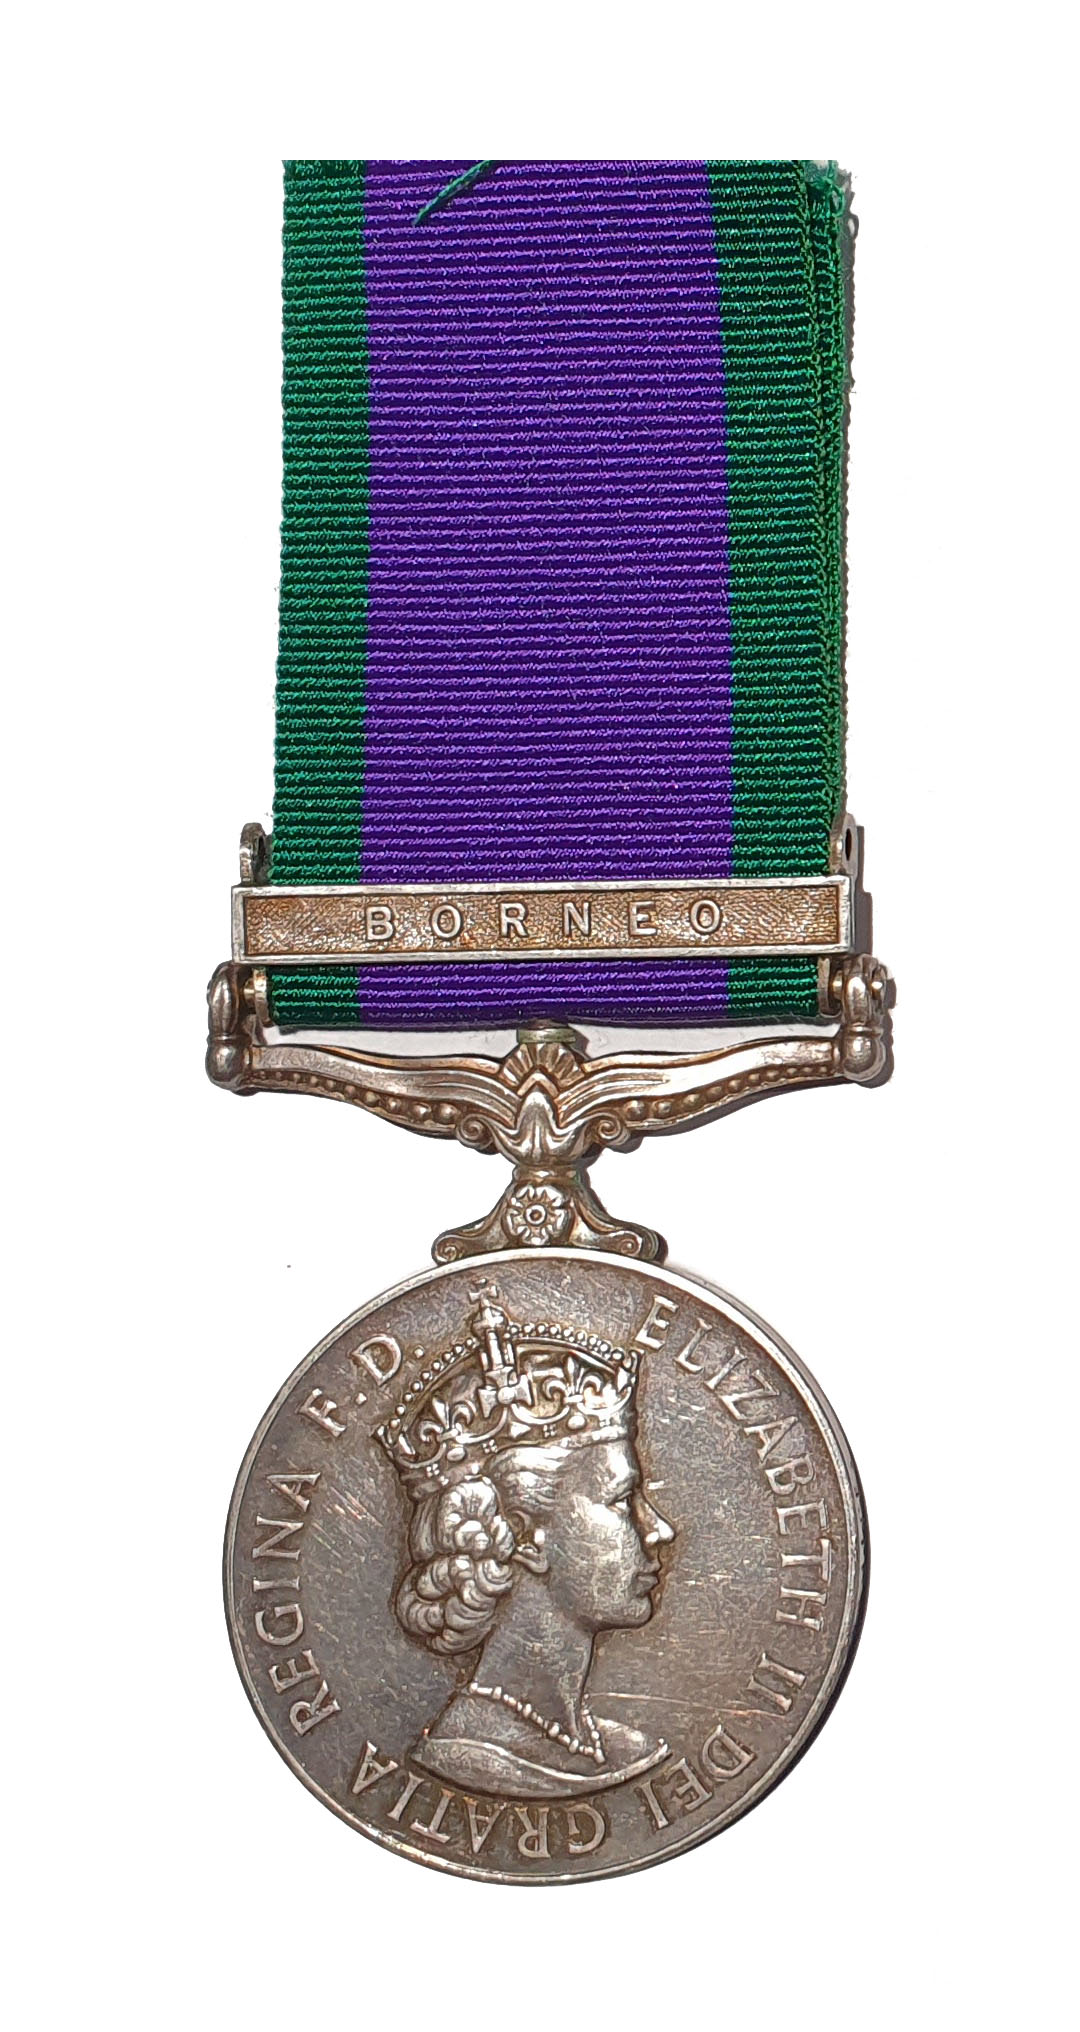 General Service Medal 1962-2007, one clasp, Borneo awarded to Police Constable Anthony Ak Dempi